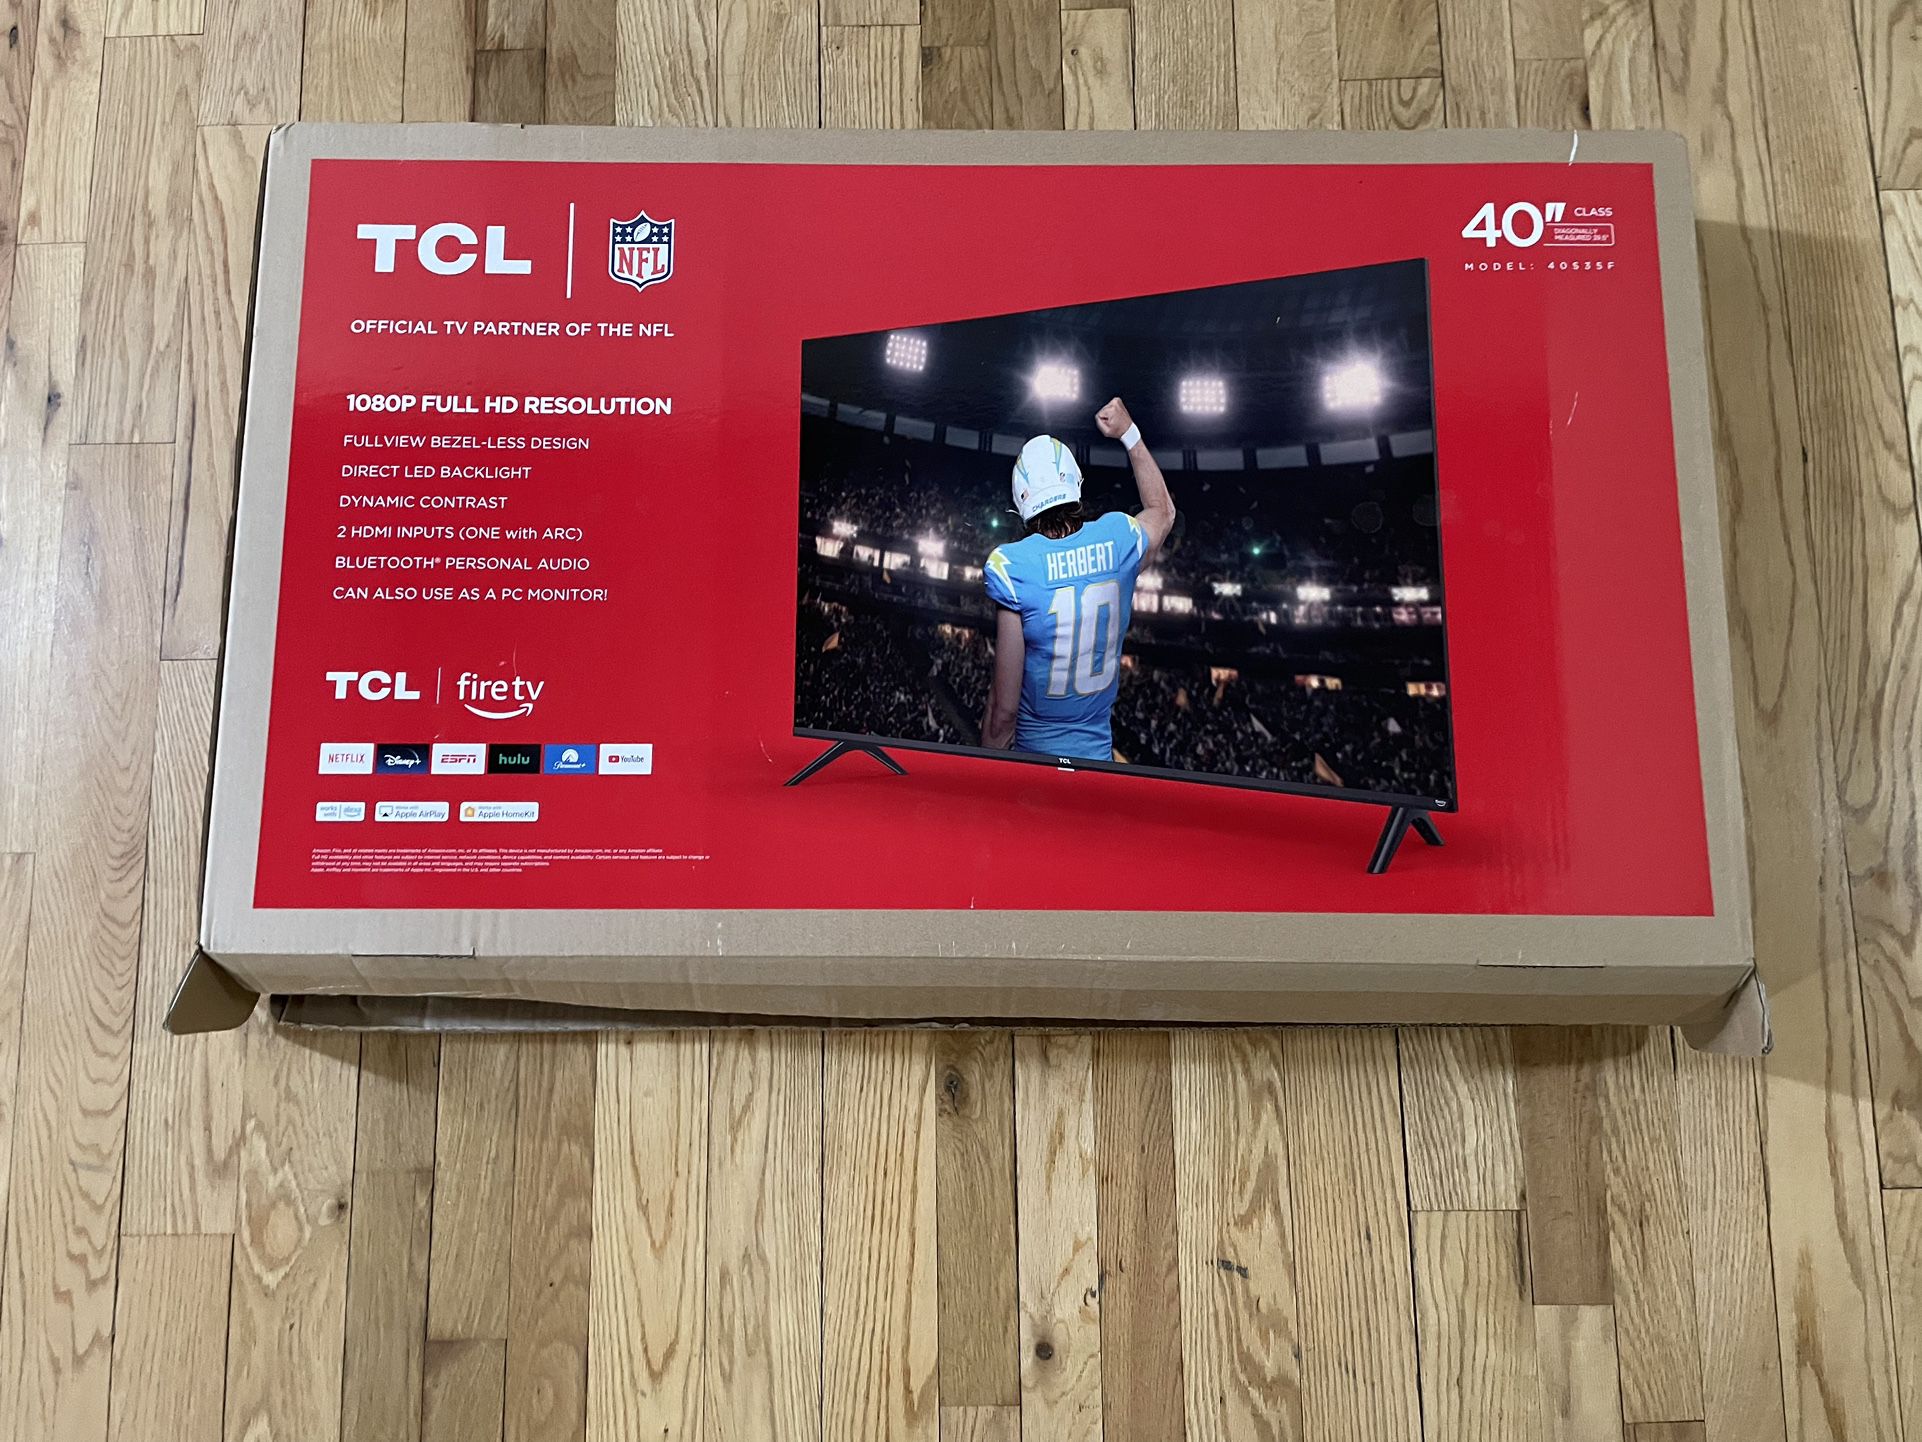 tcl fire tv 40 inch